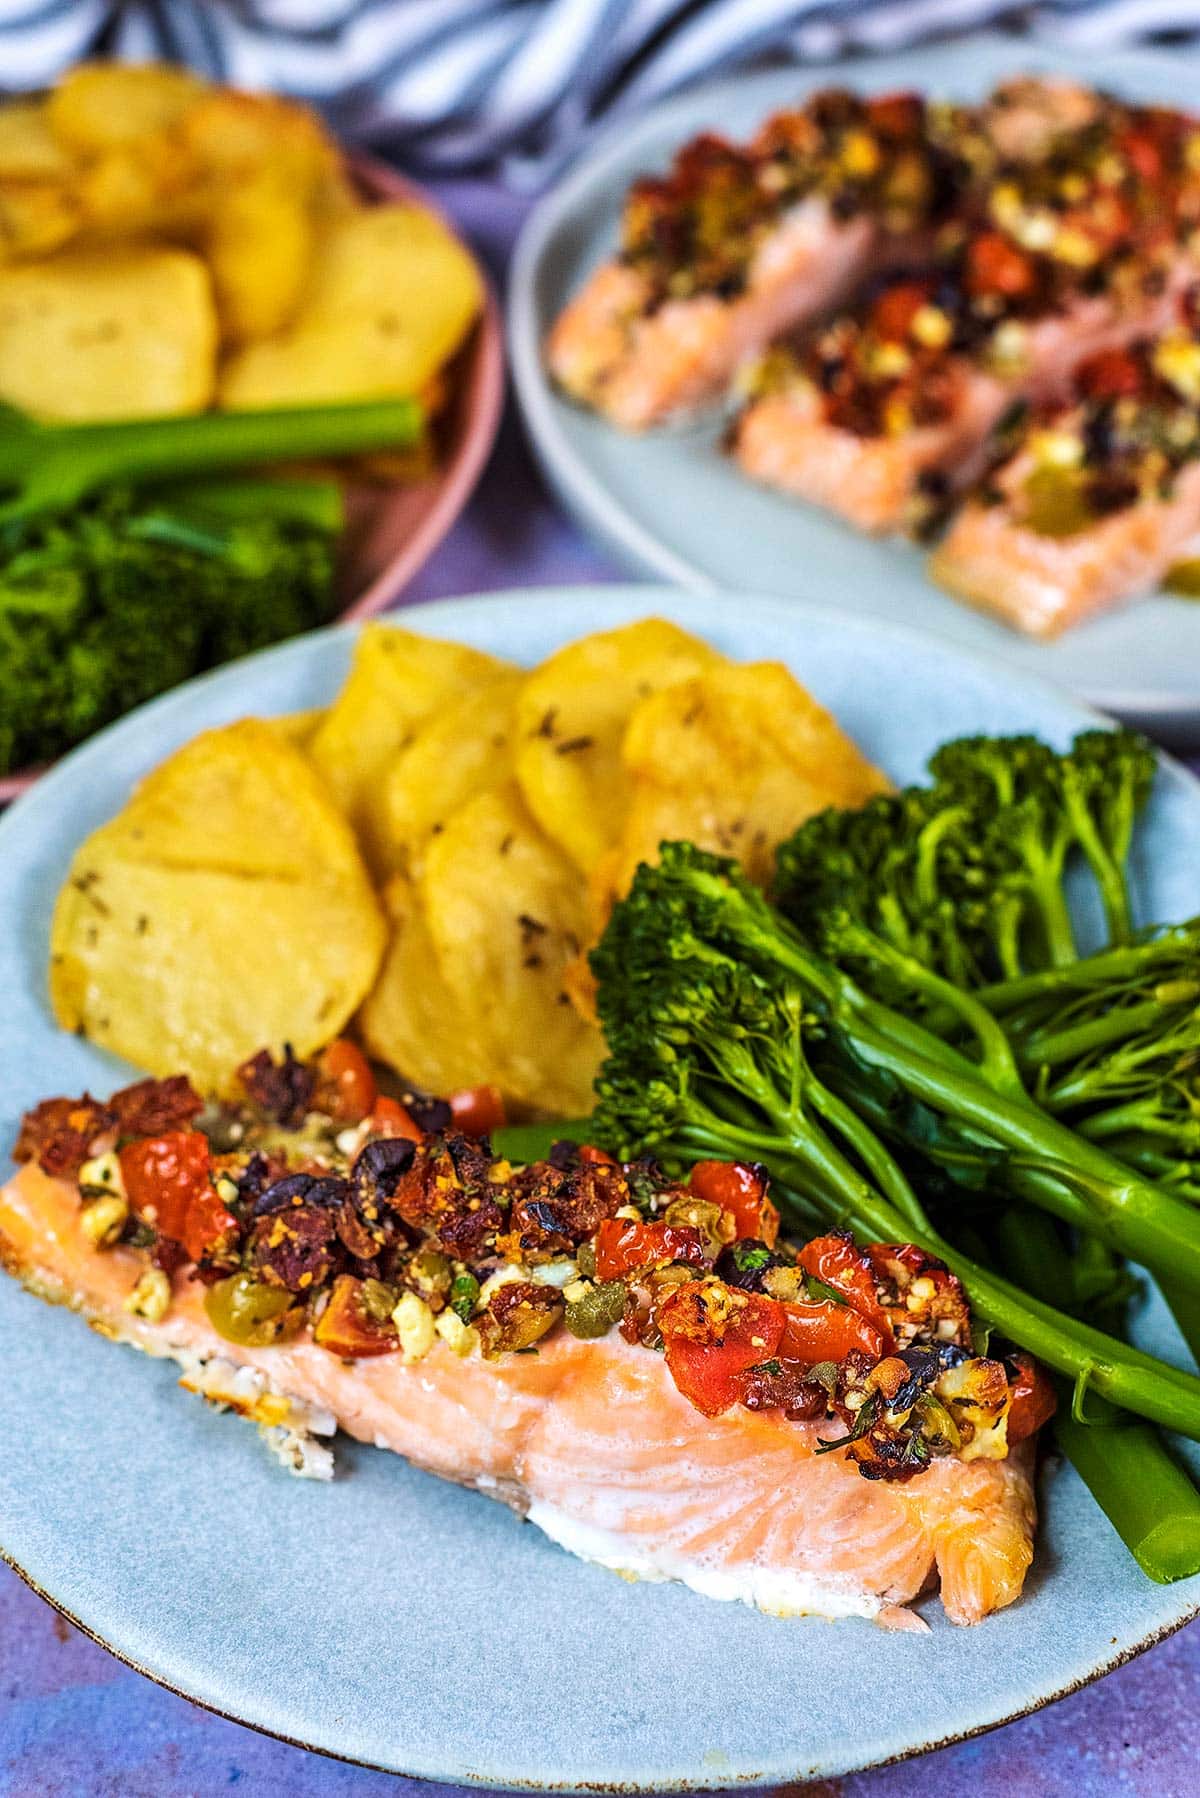 A plate of salmon, broccoli and potatoes in front of another plate of salmon.